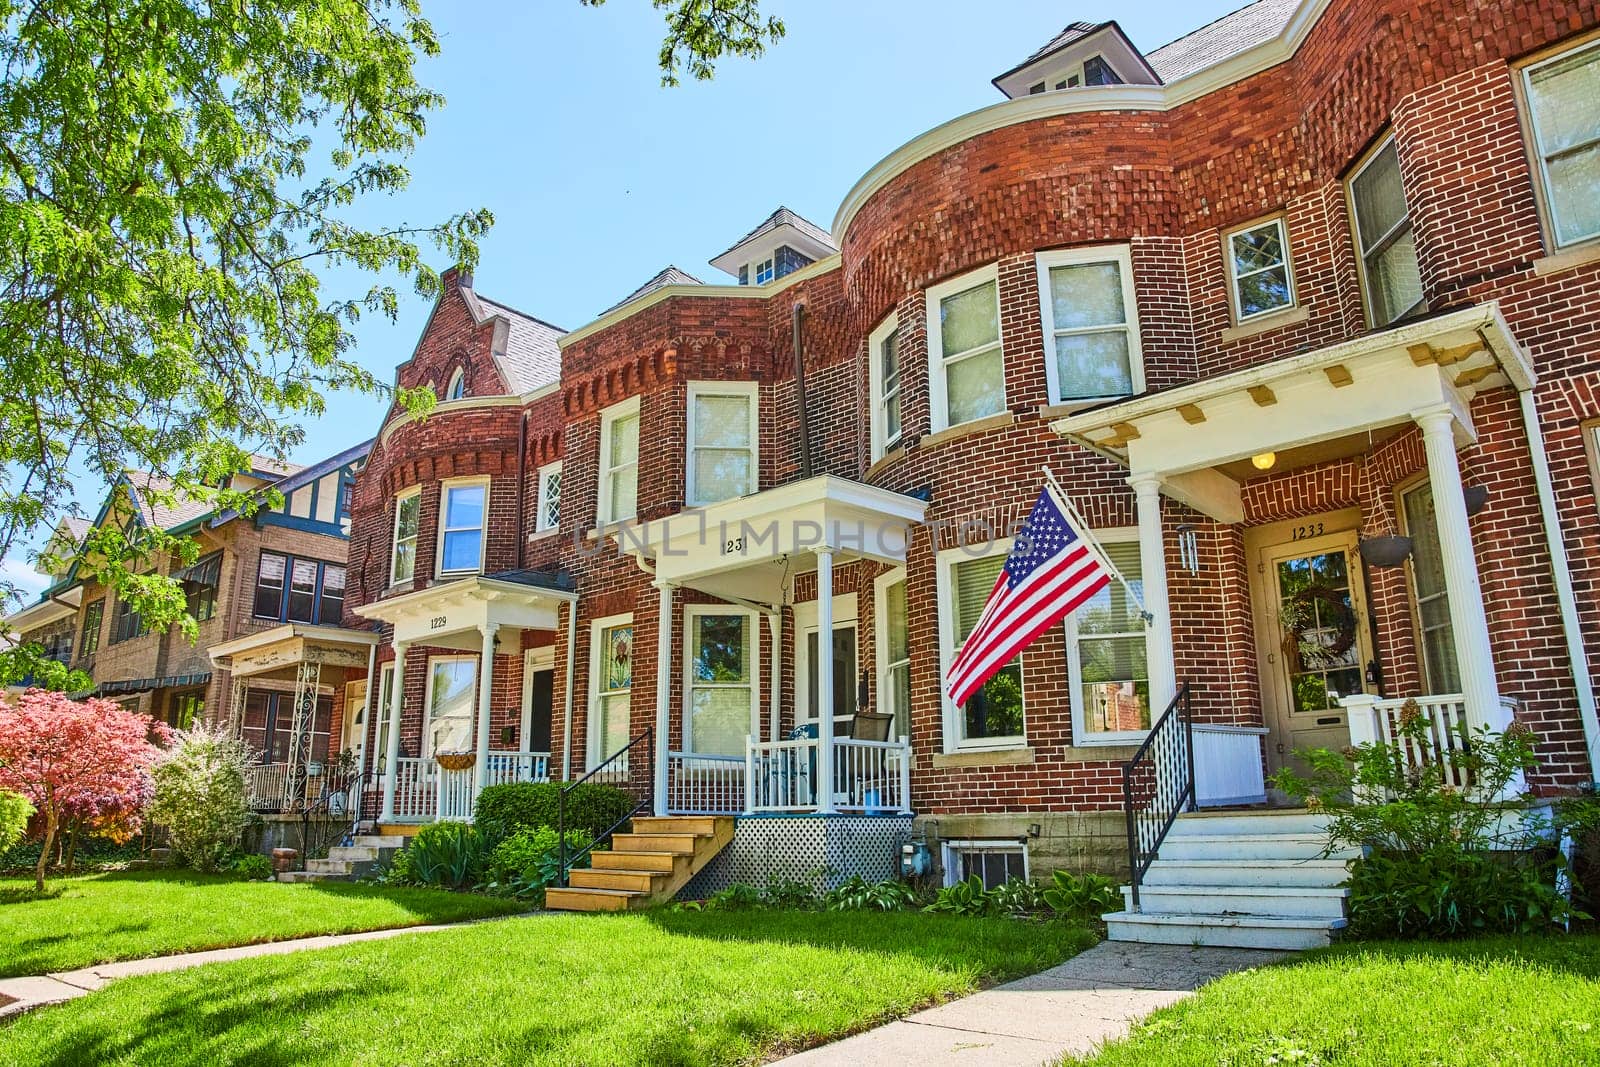 Sunny suburban street in Fort Wayne with traditional brick houses and American flag, symbolizing community and patriotism.